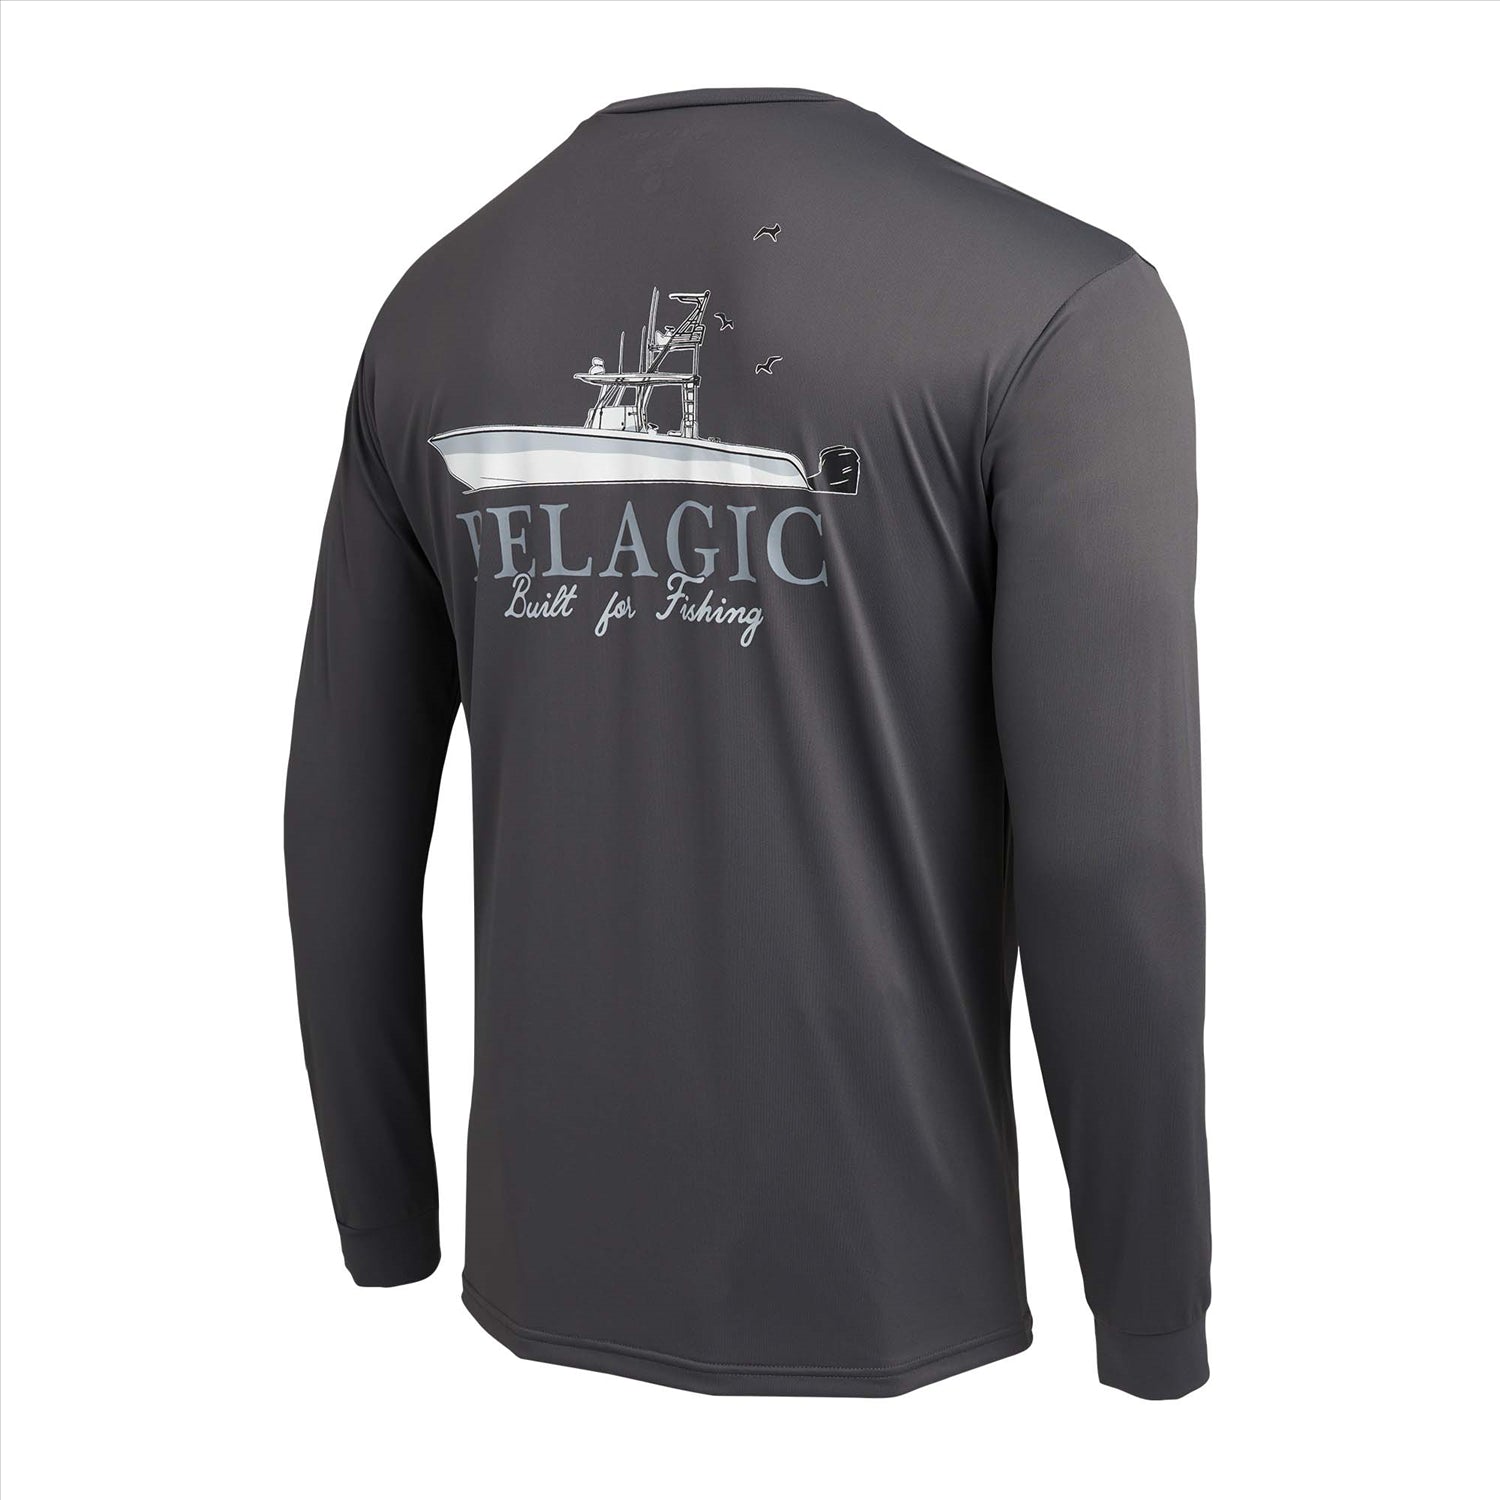 PELAGIC Apparel Men's Vaportek Let's Go Hooded Fishing Shirt, Long Sleeve,  UPF 50+ Protection, Water and Stain Repellent, Ventilated and Lightweight